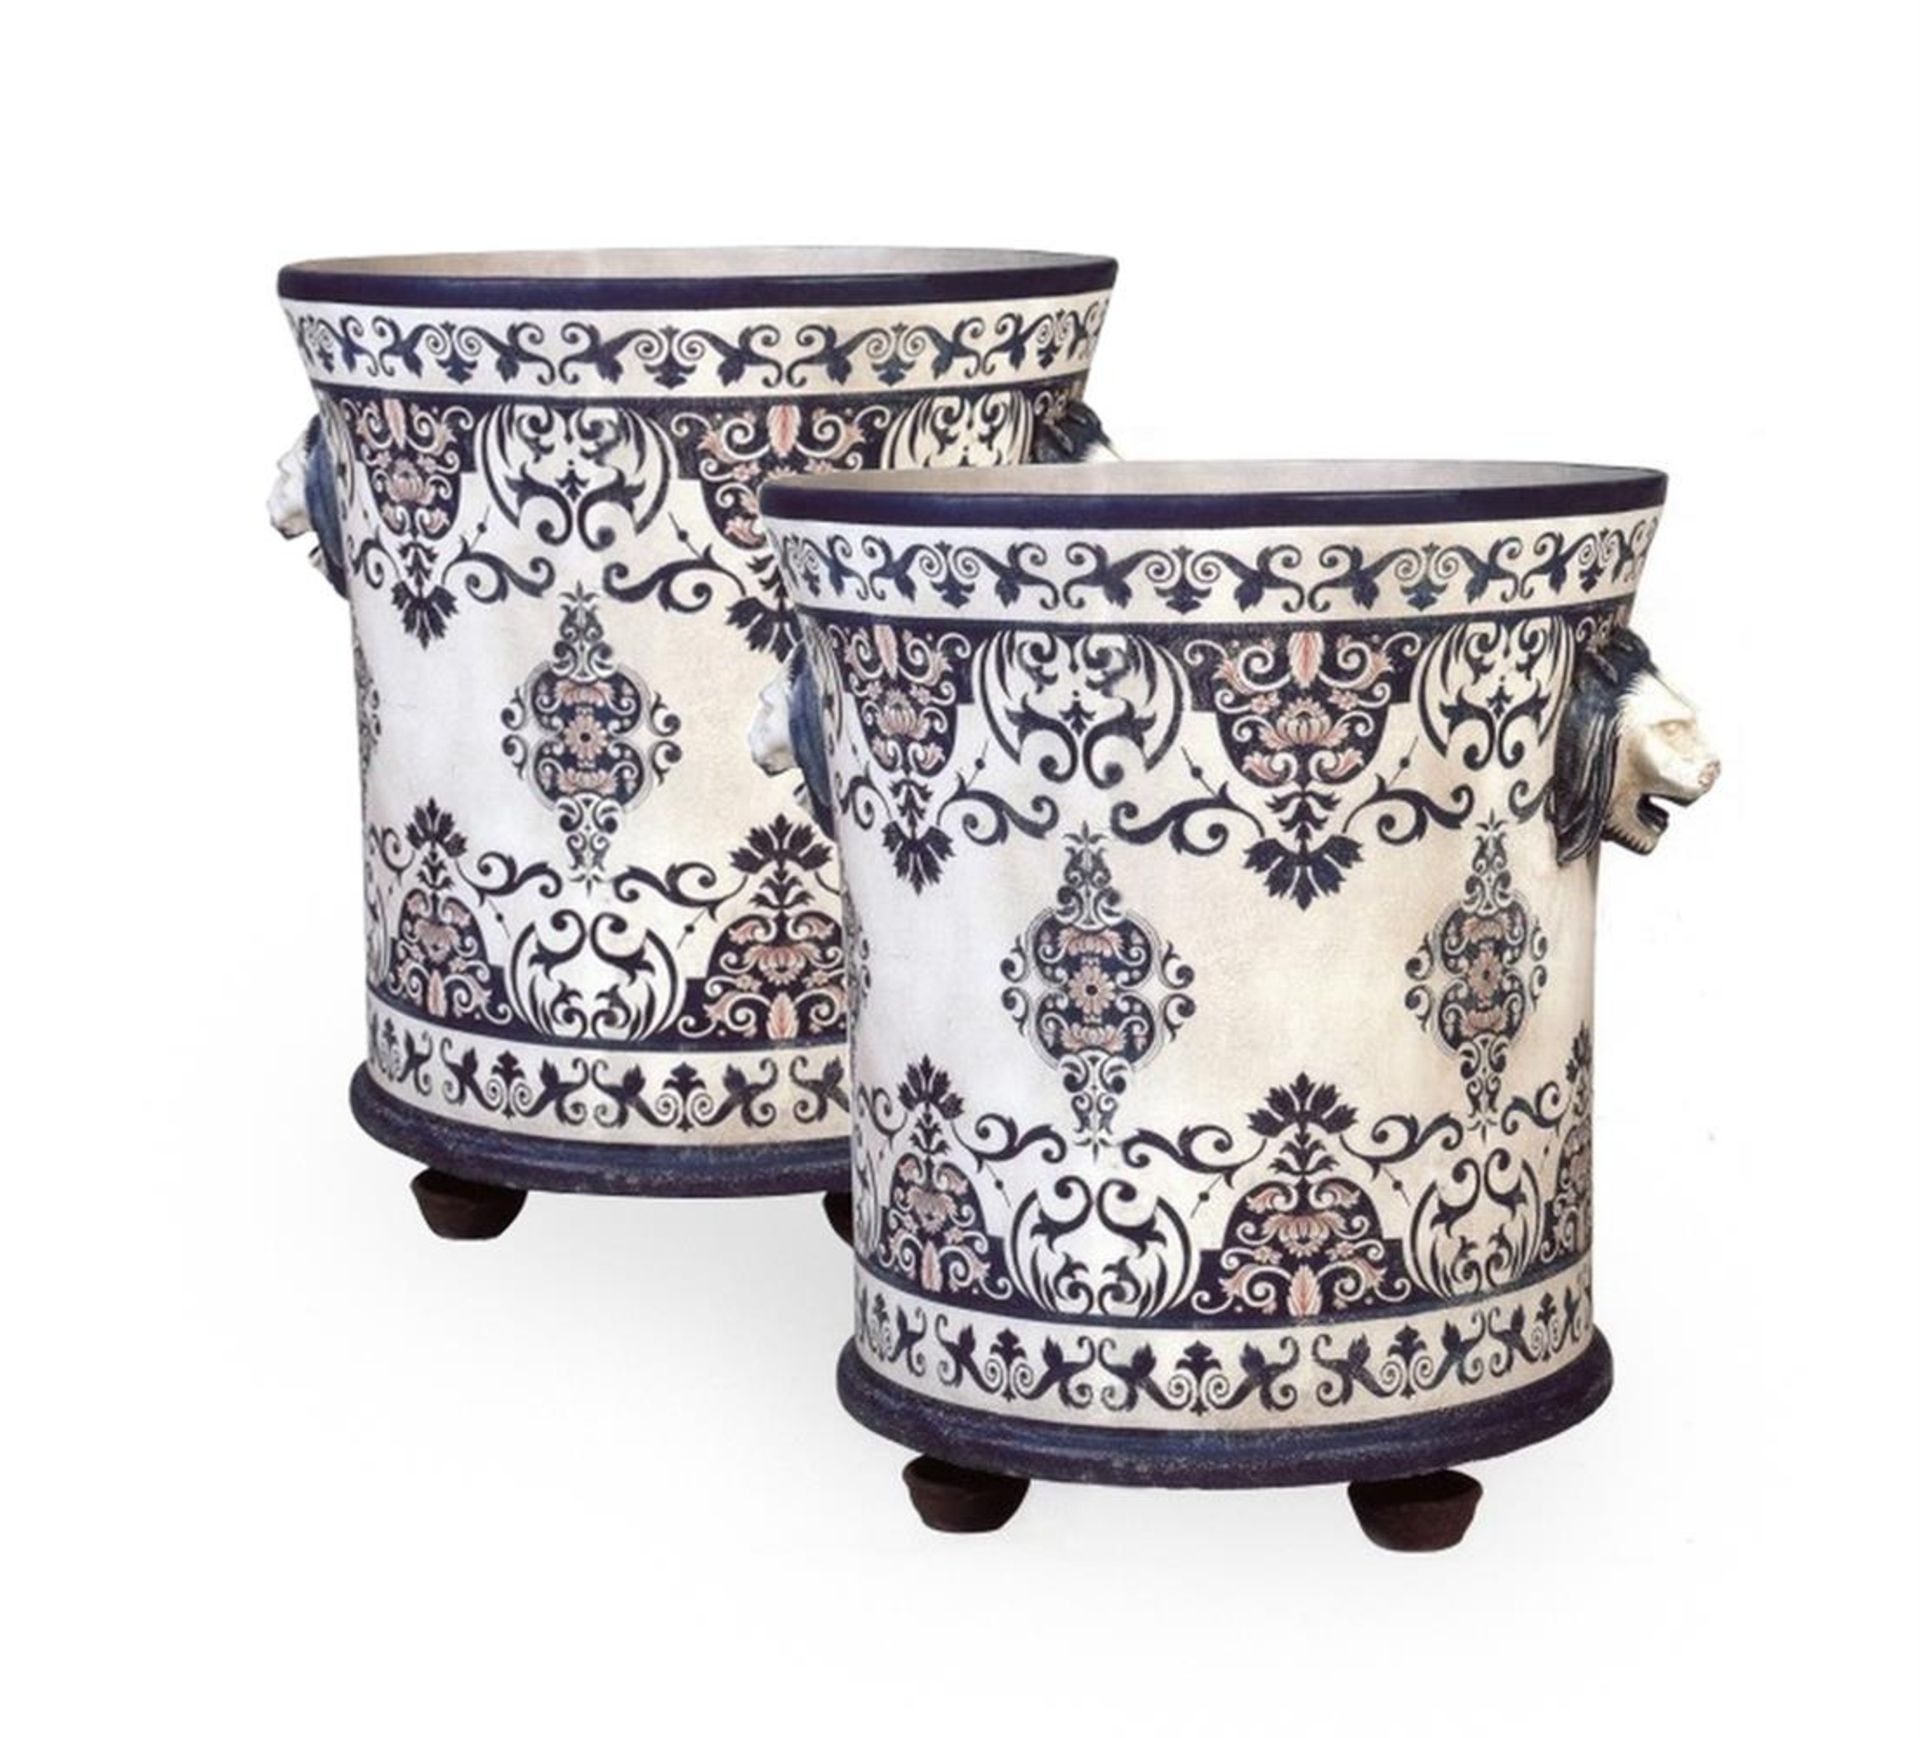 A PAIR OF BLUE ORANGERIE URNS BY GUINEVERE